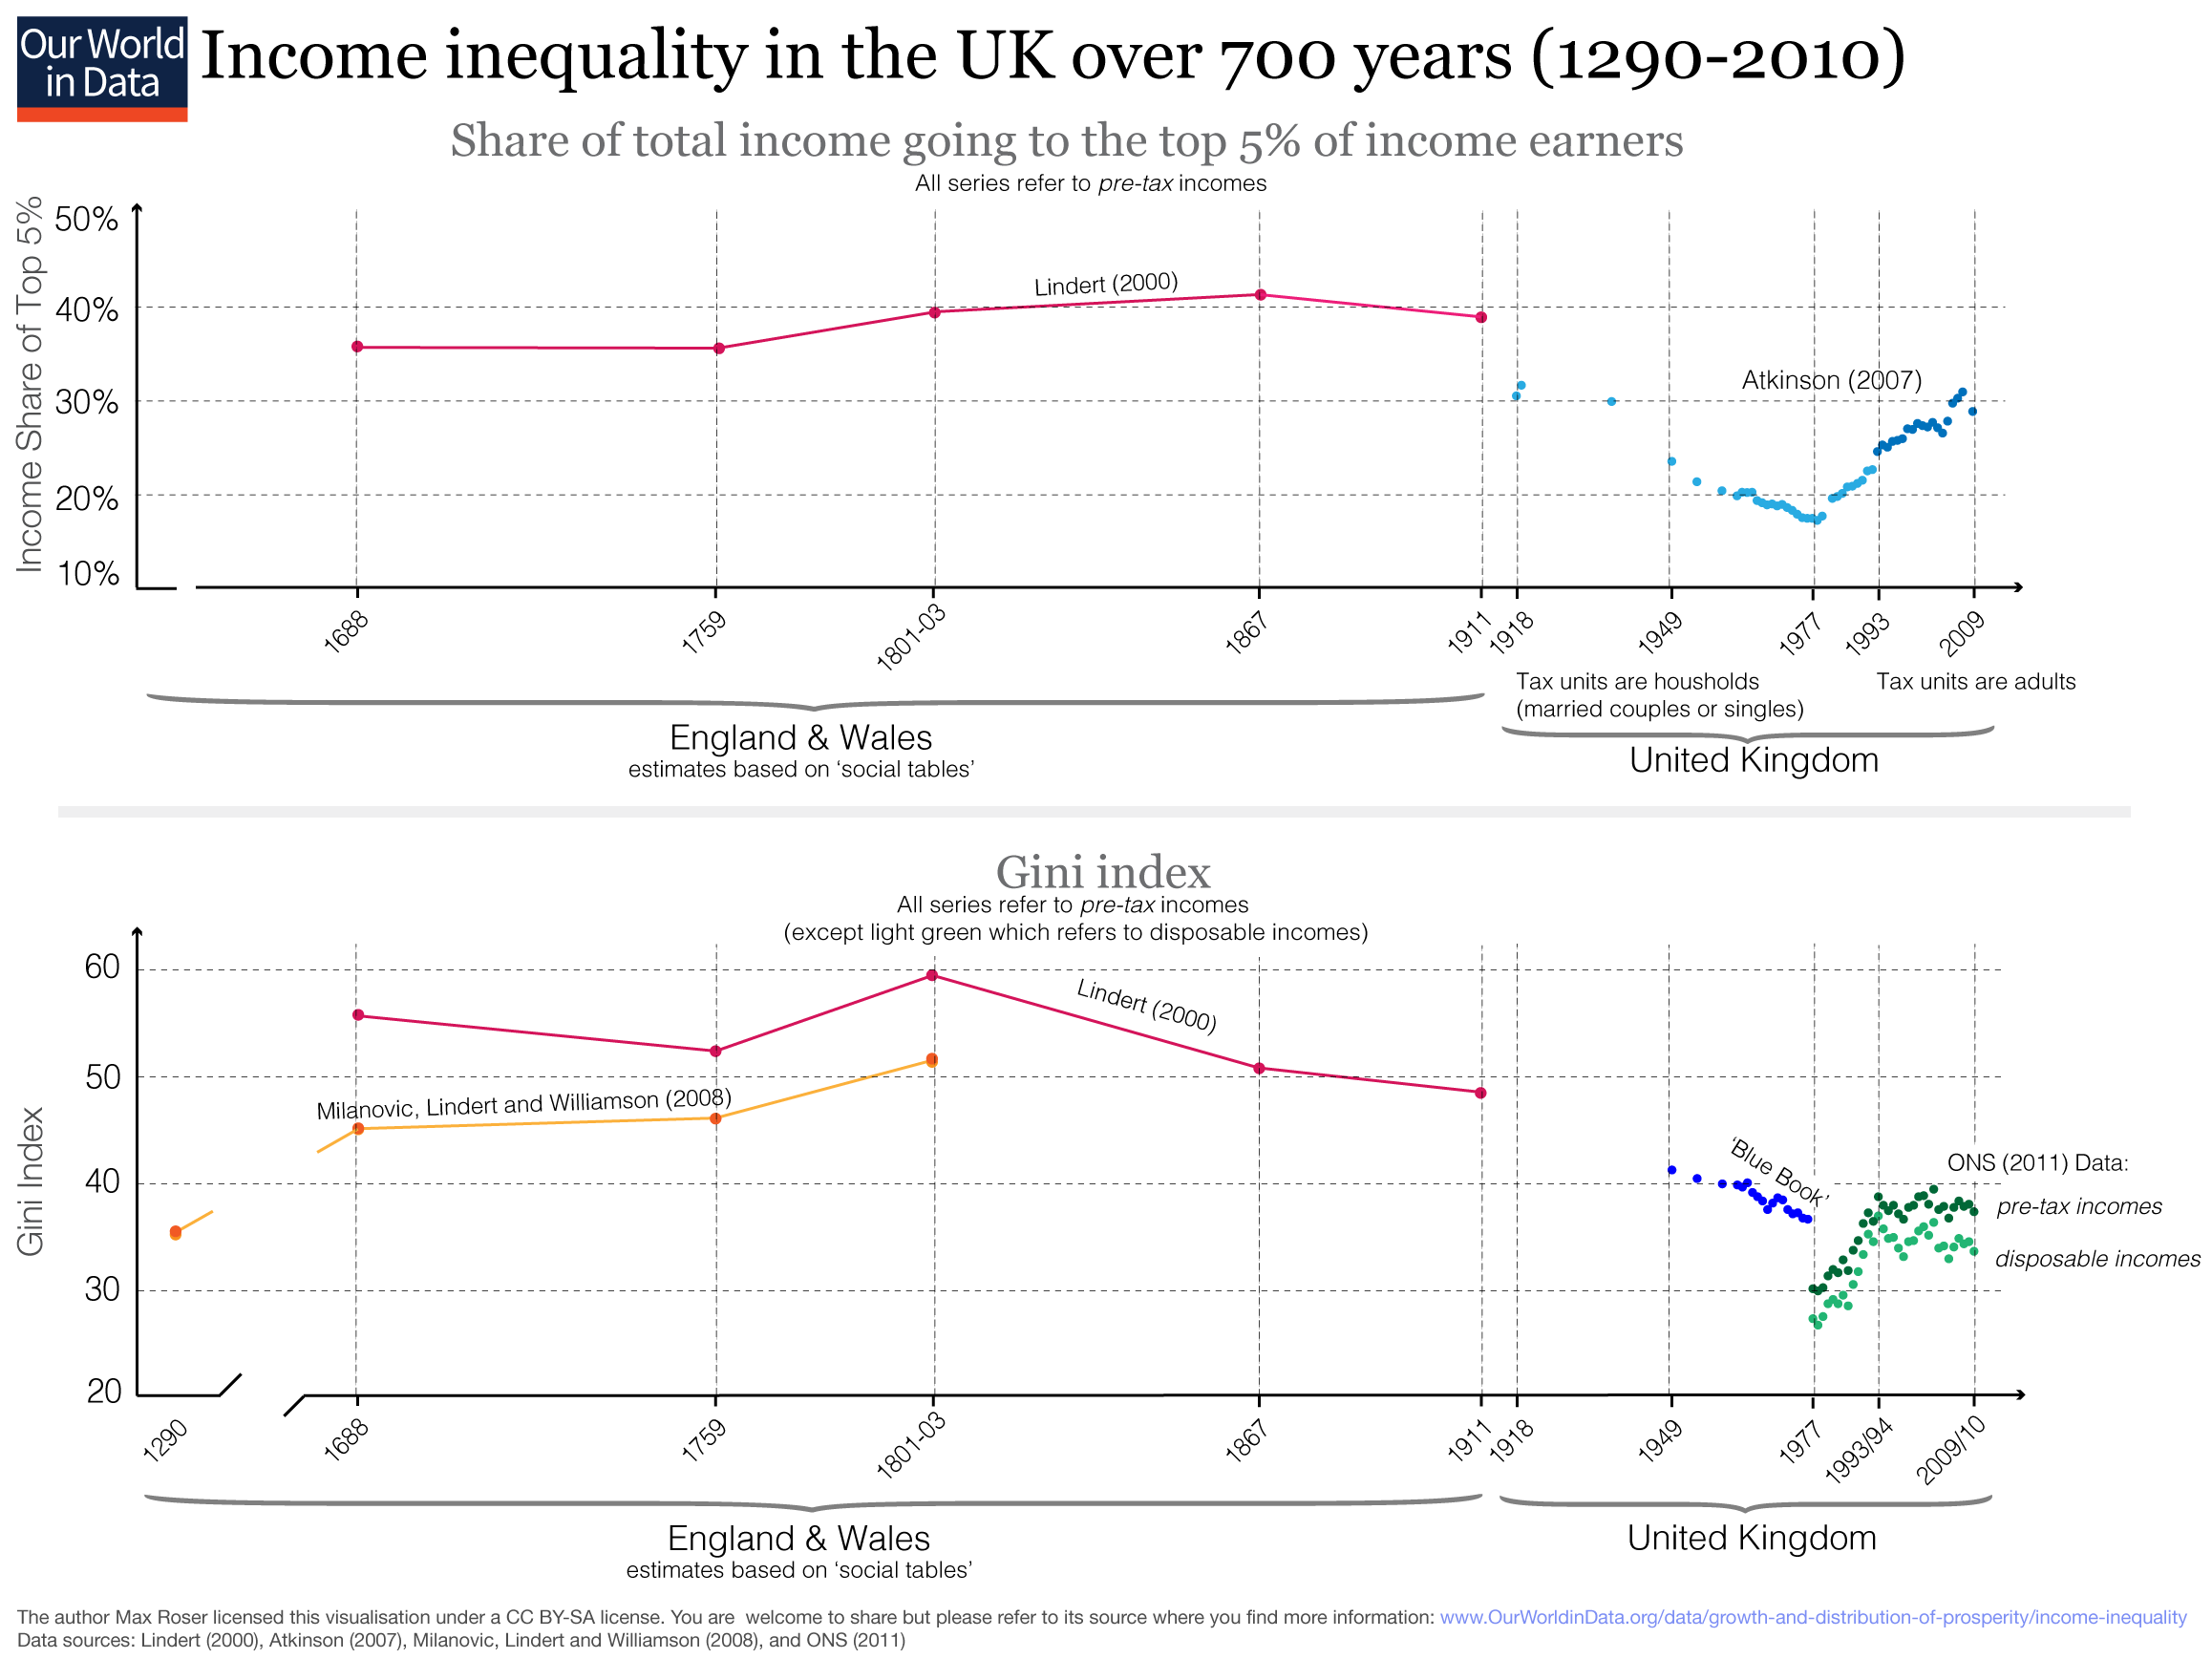 income inequality - our world in data